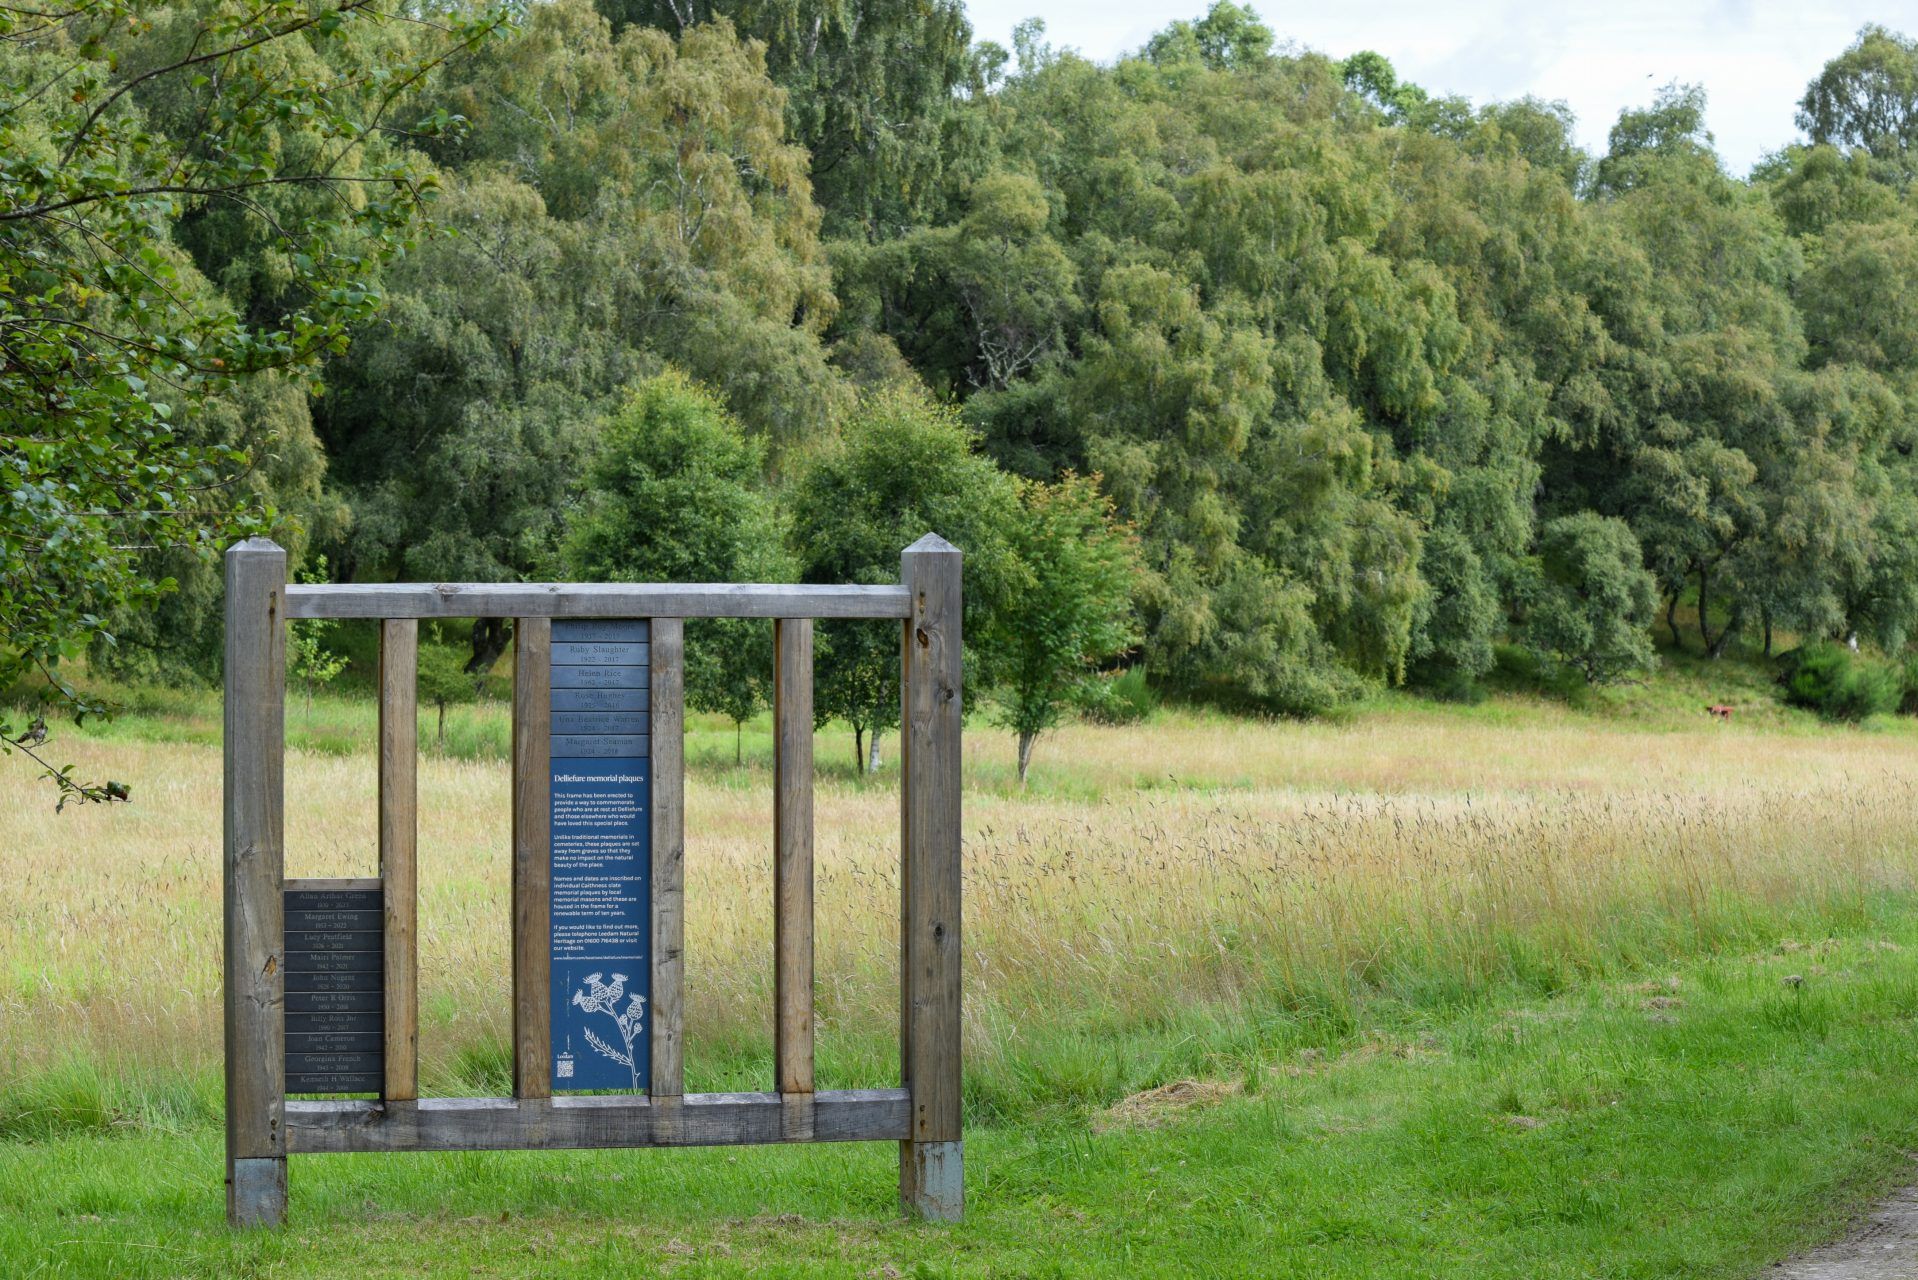 A memorial panel in the meadow, with slate plaques dedicated to people buried at Delliefure natural burial ground.